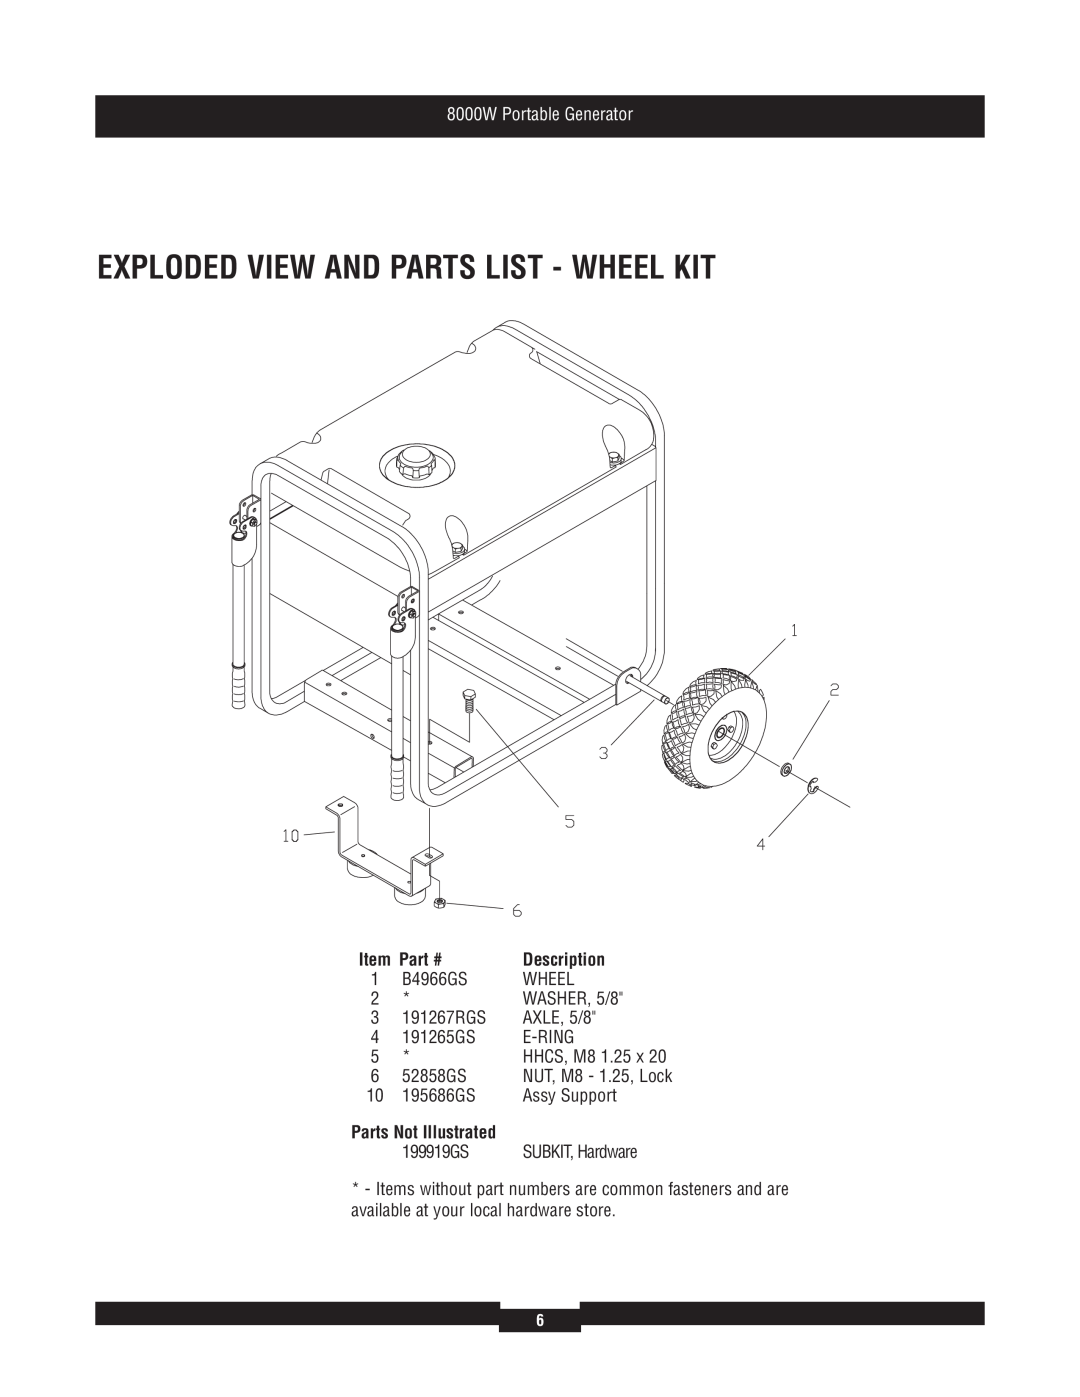 Briggs & Stratton 030385 manual Exploded View And Parts List - Wheel Kit, 8000W Portable Generator, Description 